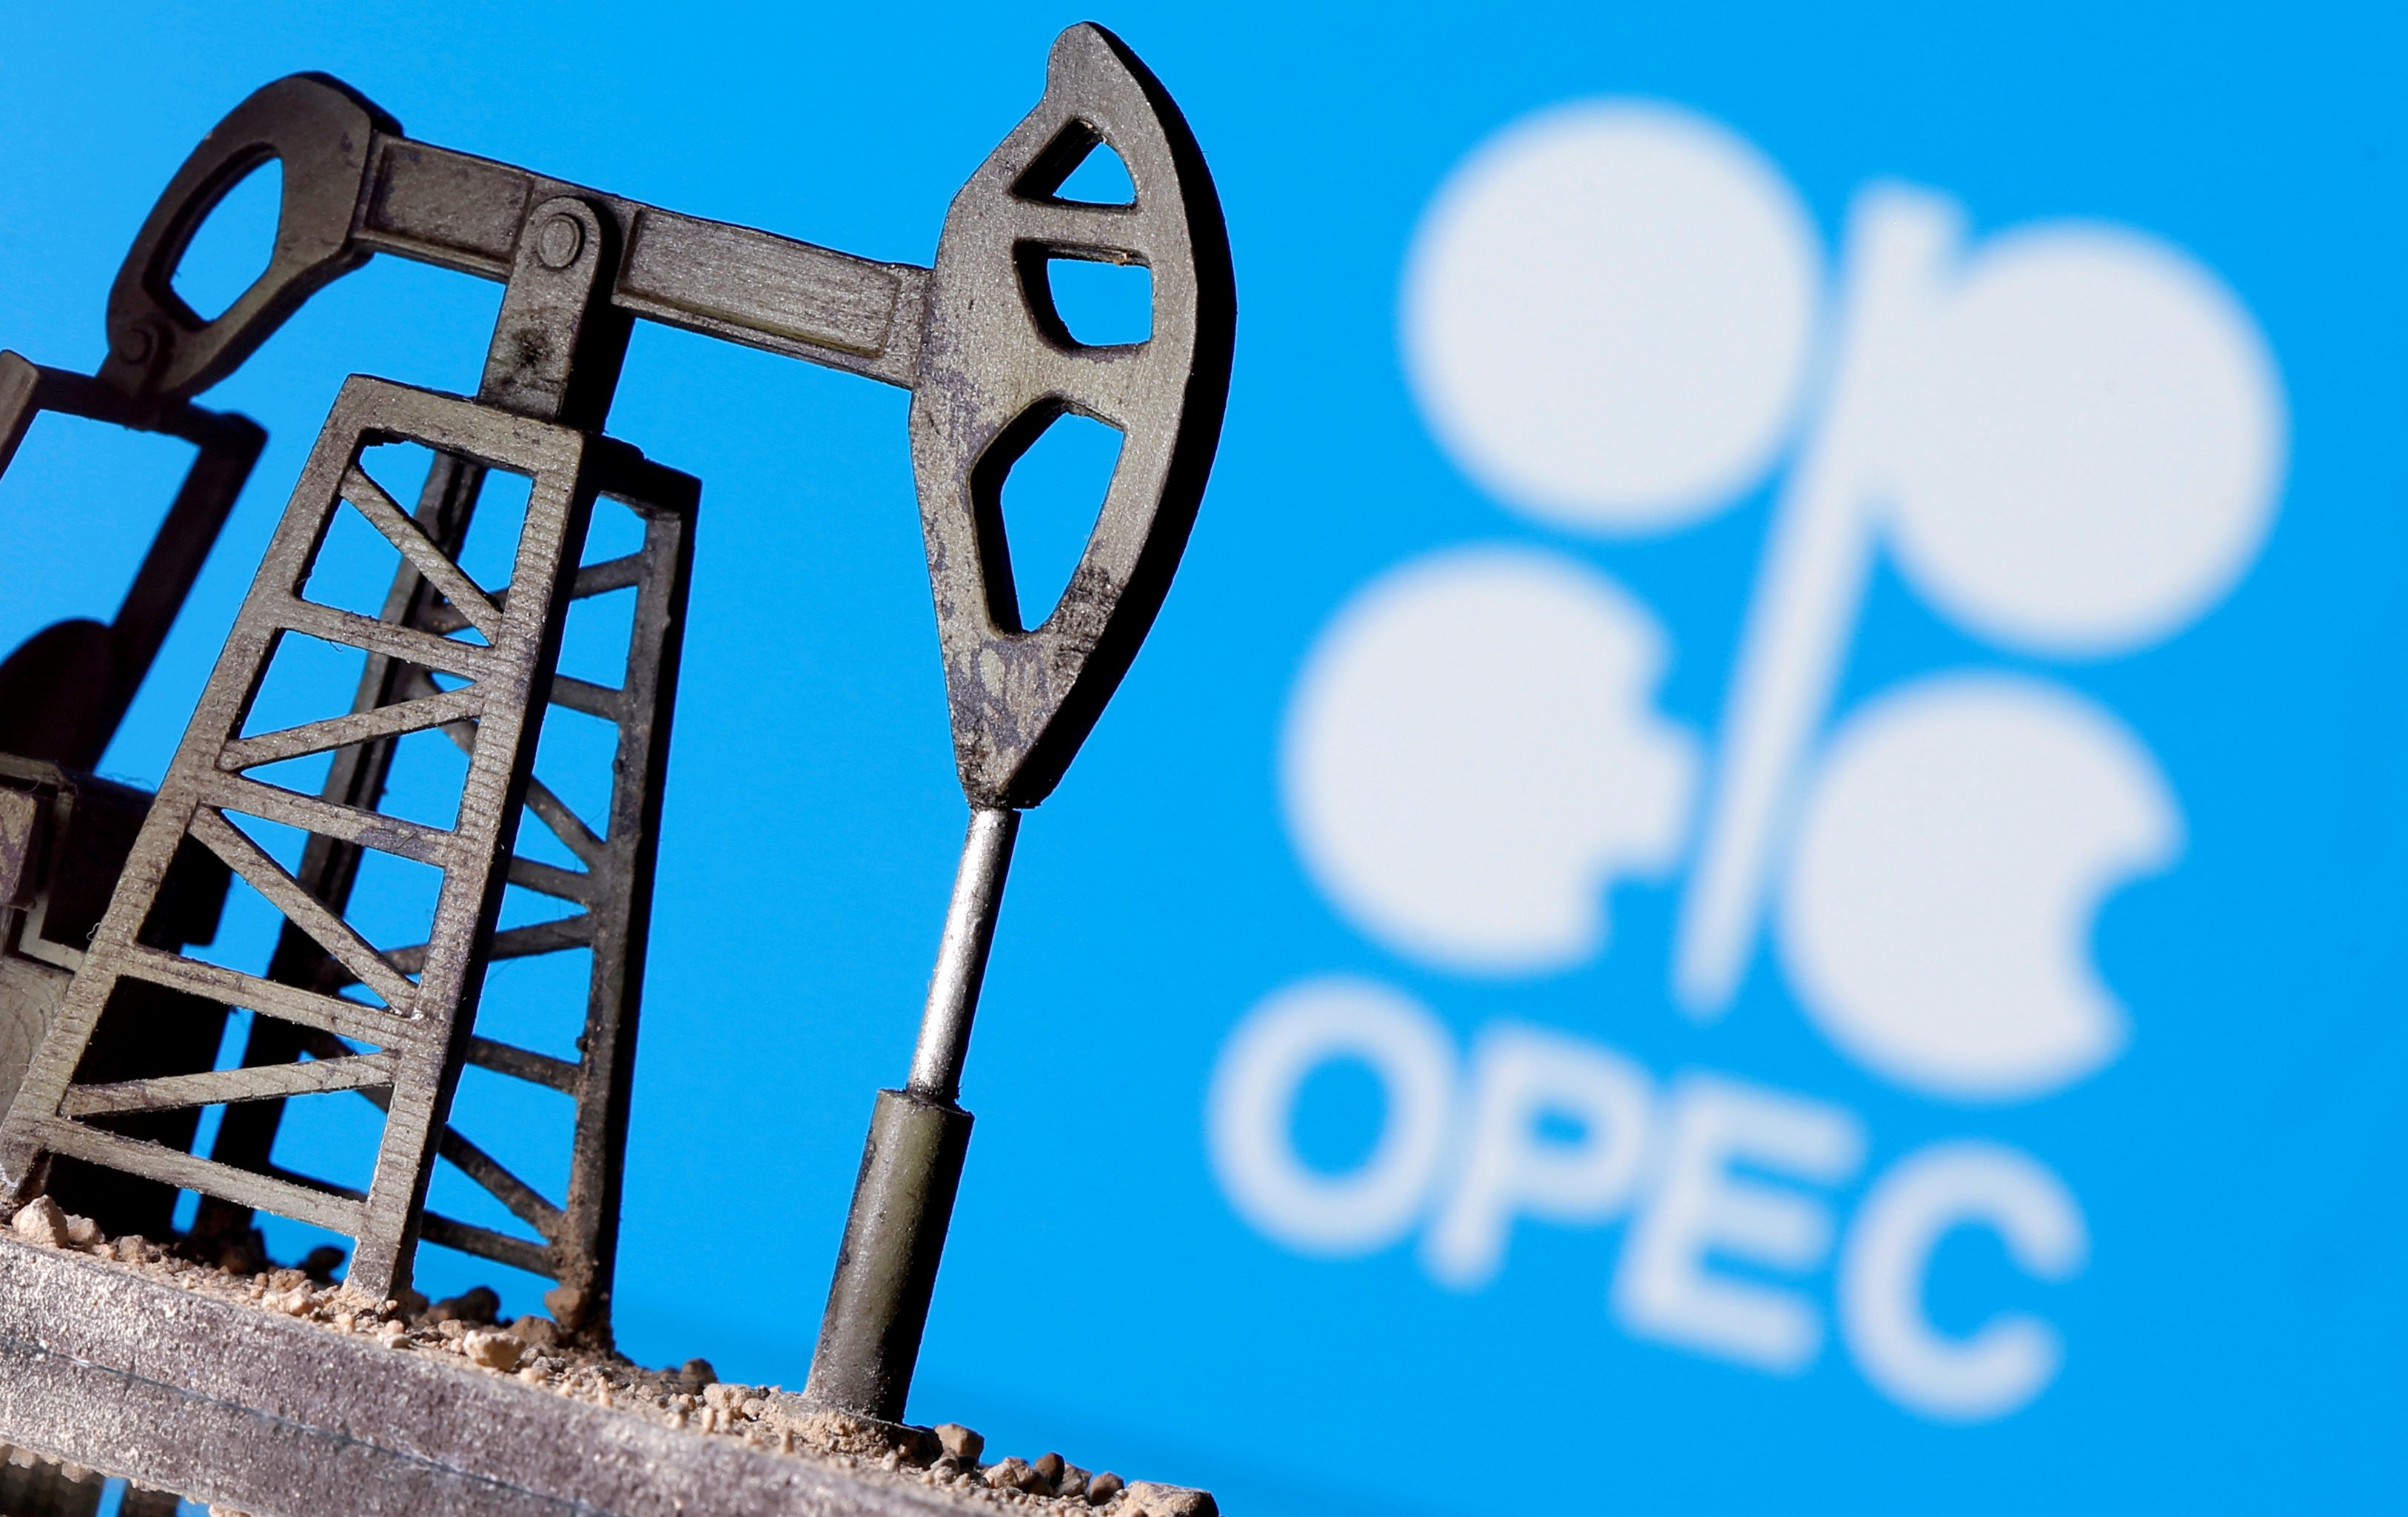 OPEC+ caution and money behind reluctance to pump more oil – sources